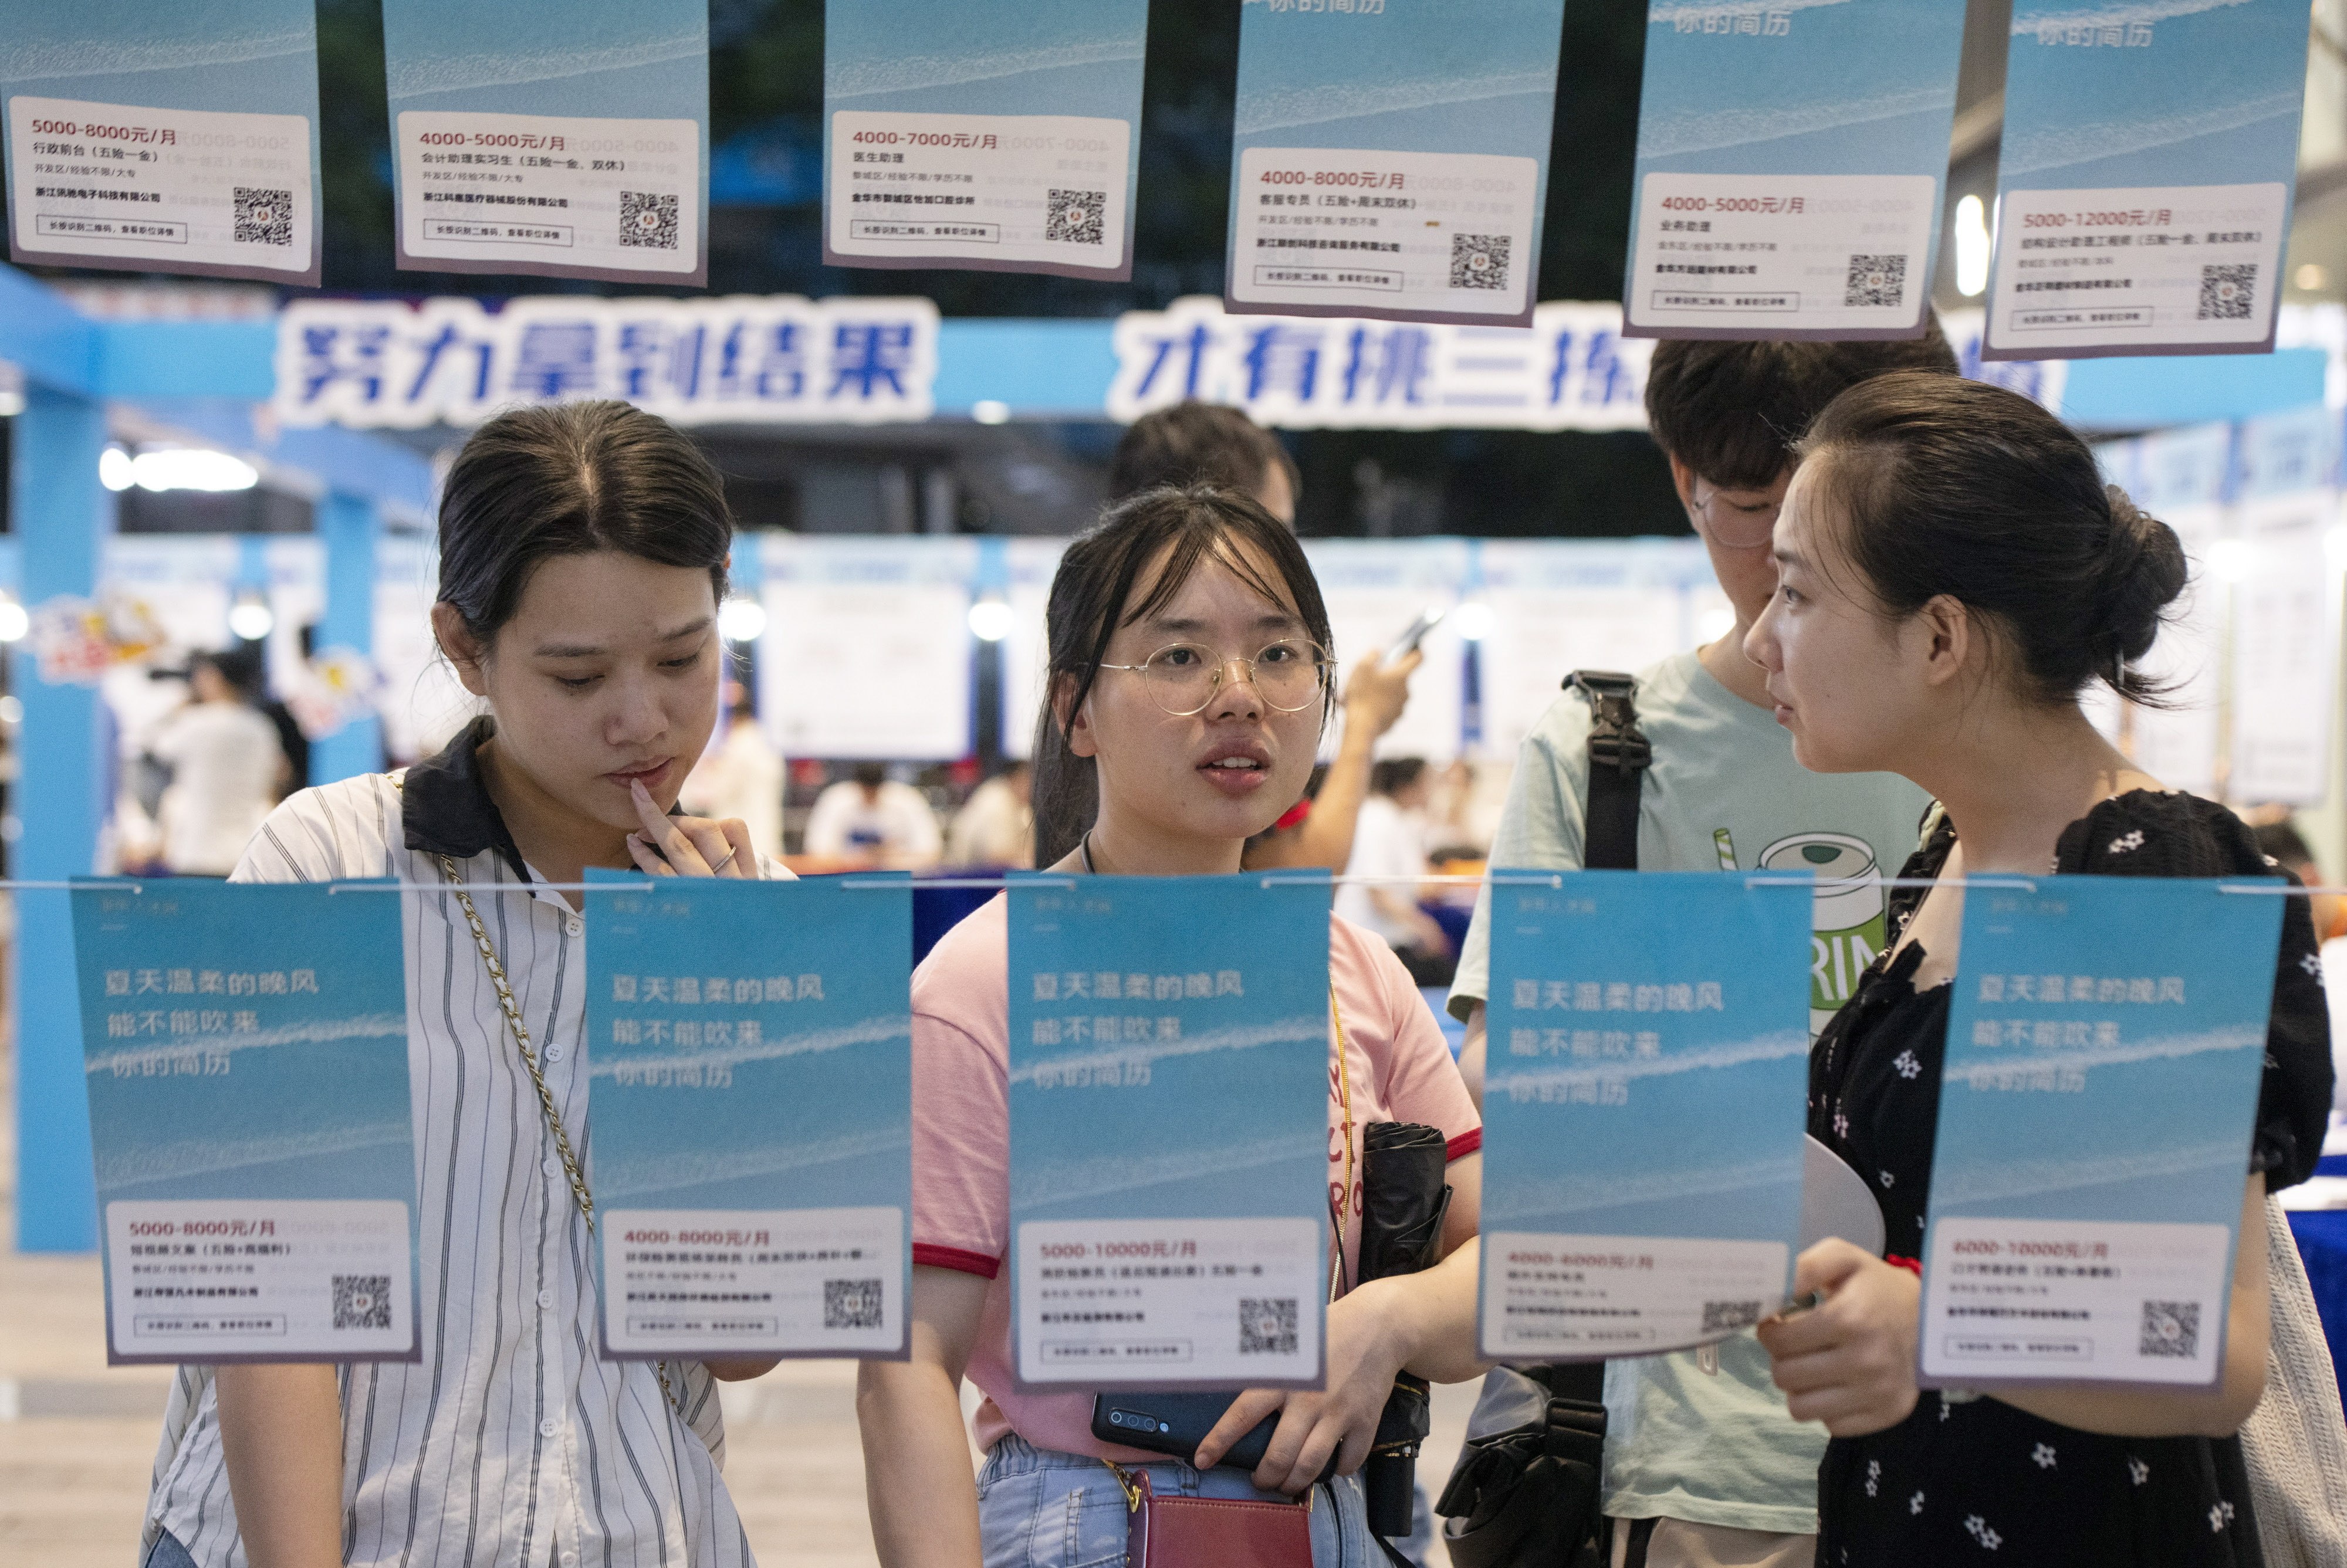 China’s youth unemployment rate for the 16-24 age group rose to a record 21.3 per cent in June. Photo: EPA-EFE